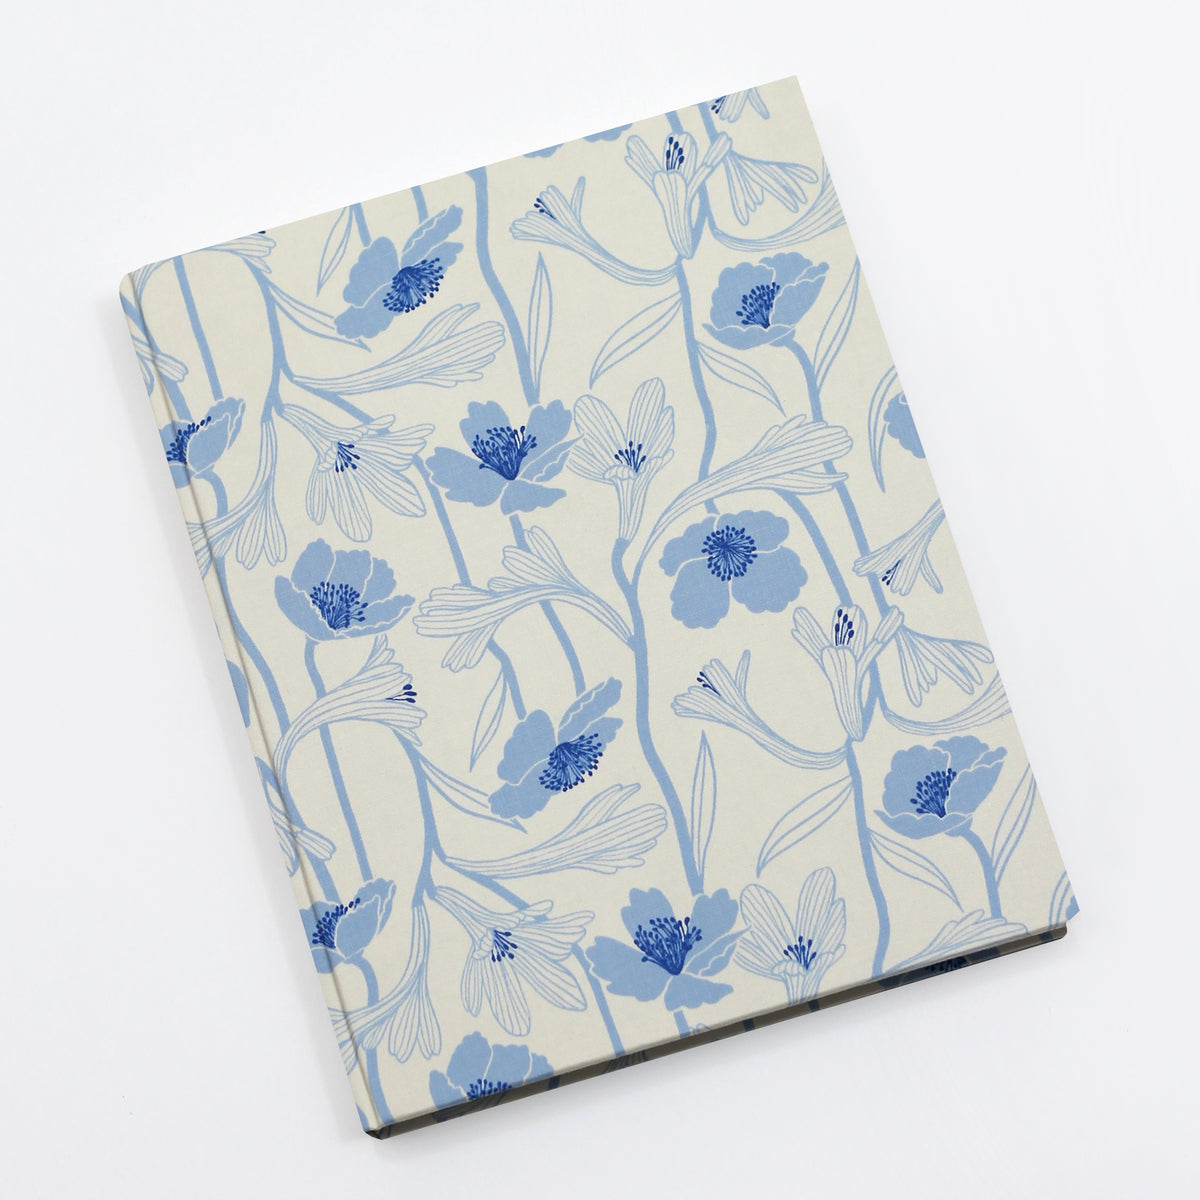 Large 8 x 10 Blank Page Journal | Limited Edition Cover: Water Flowers White